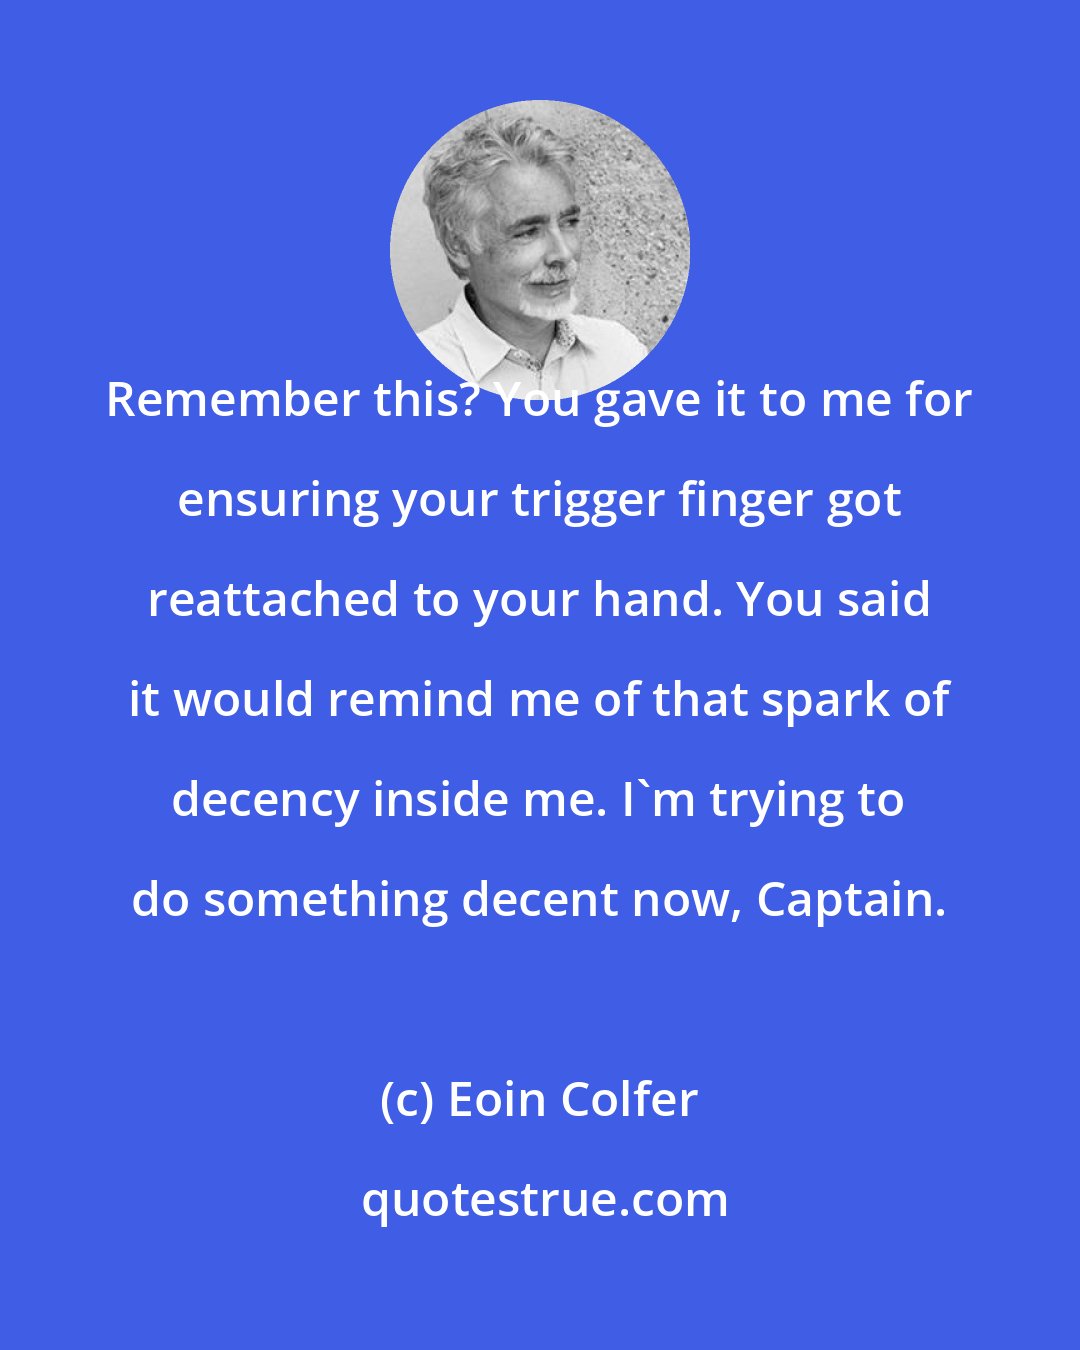 Eoin Colfer: Remember this? You gave it to me for ensuring your trigger finger got reattached to your hand. You said it would remind me of that spark of decency inside me. I'm trying to do something decent now, Captain.